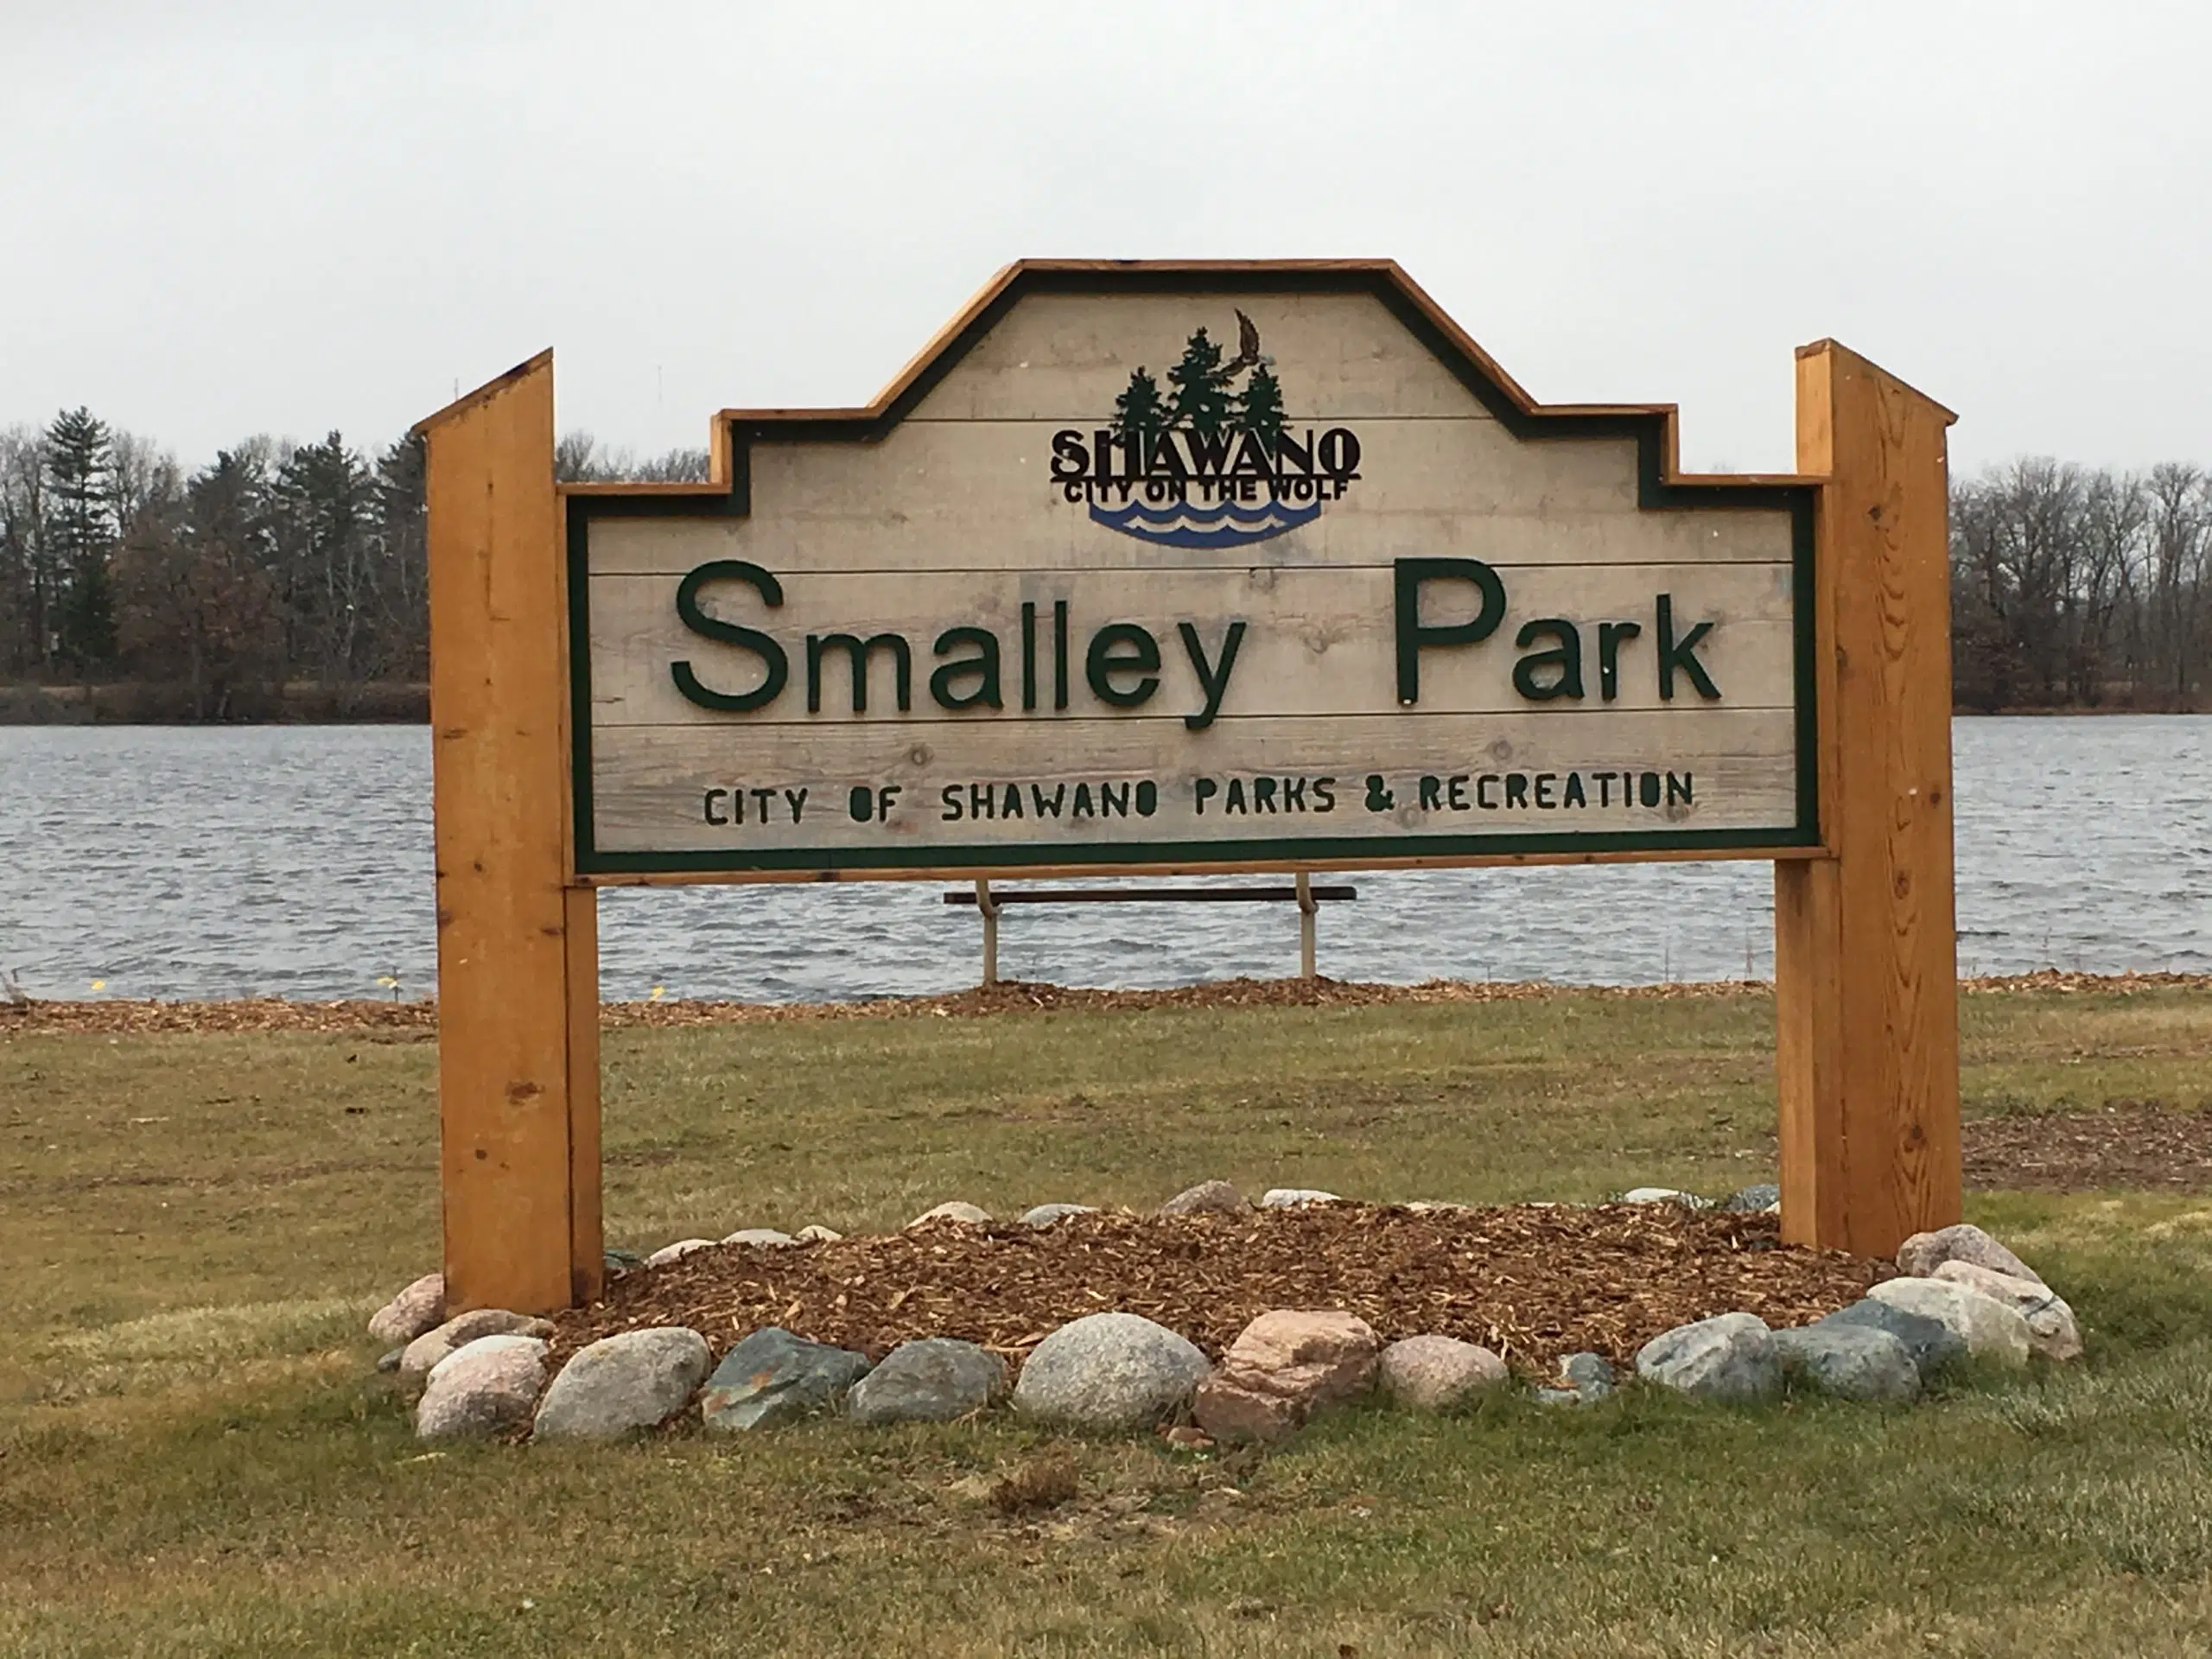 Zone change recommended for Smalley Park residential proposal